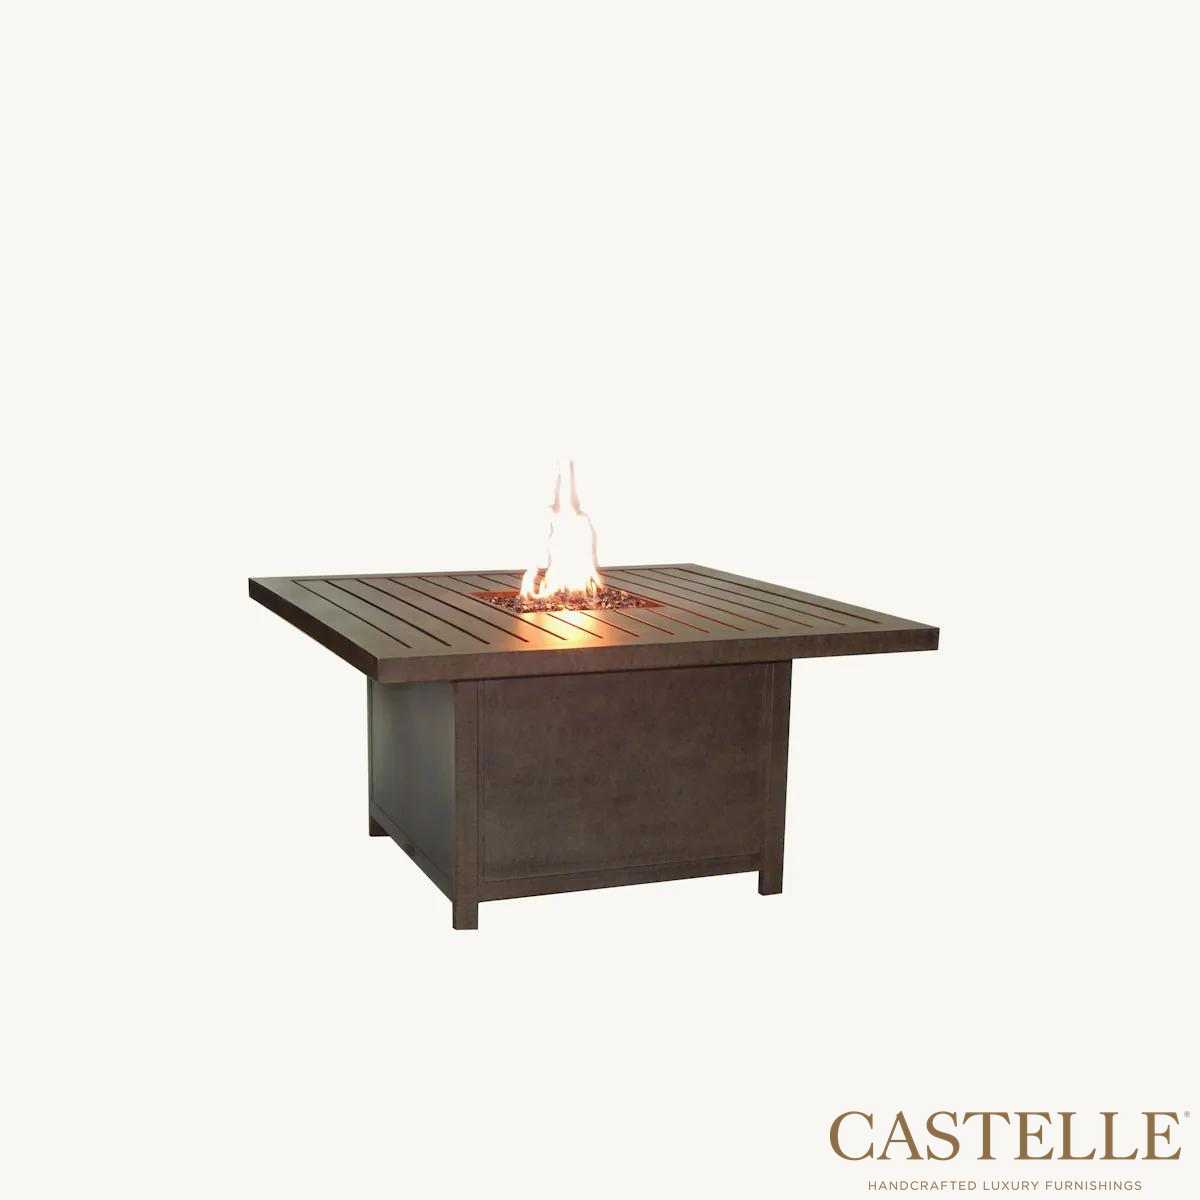 Moderna 44" Square Coffee Table With Firepit